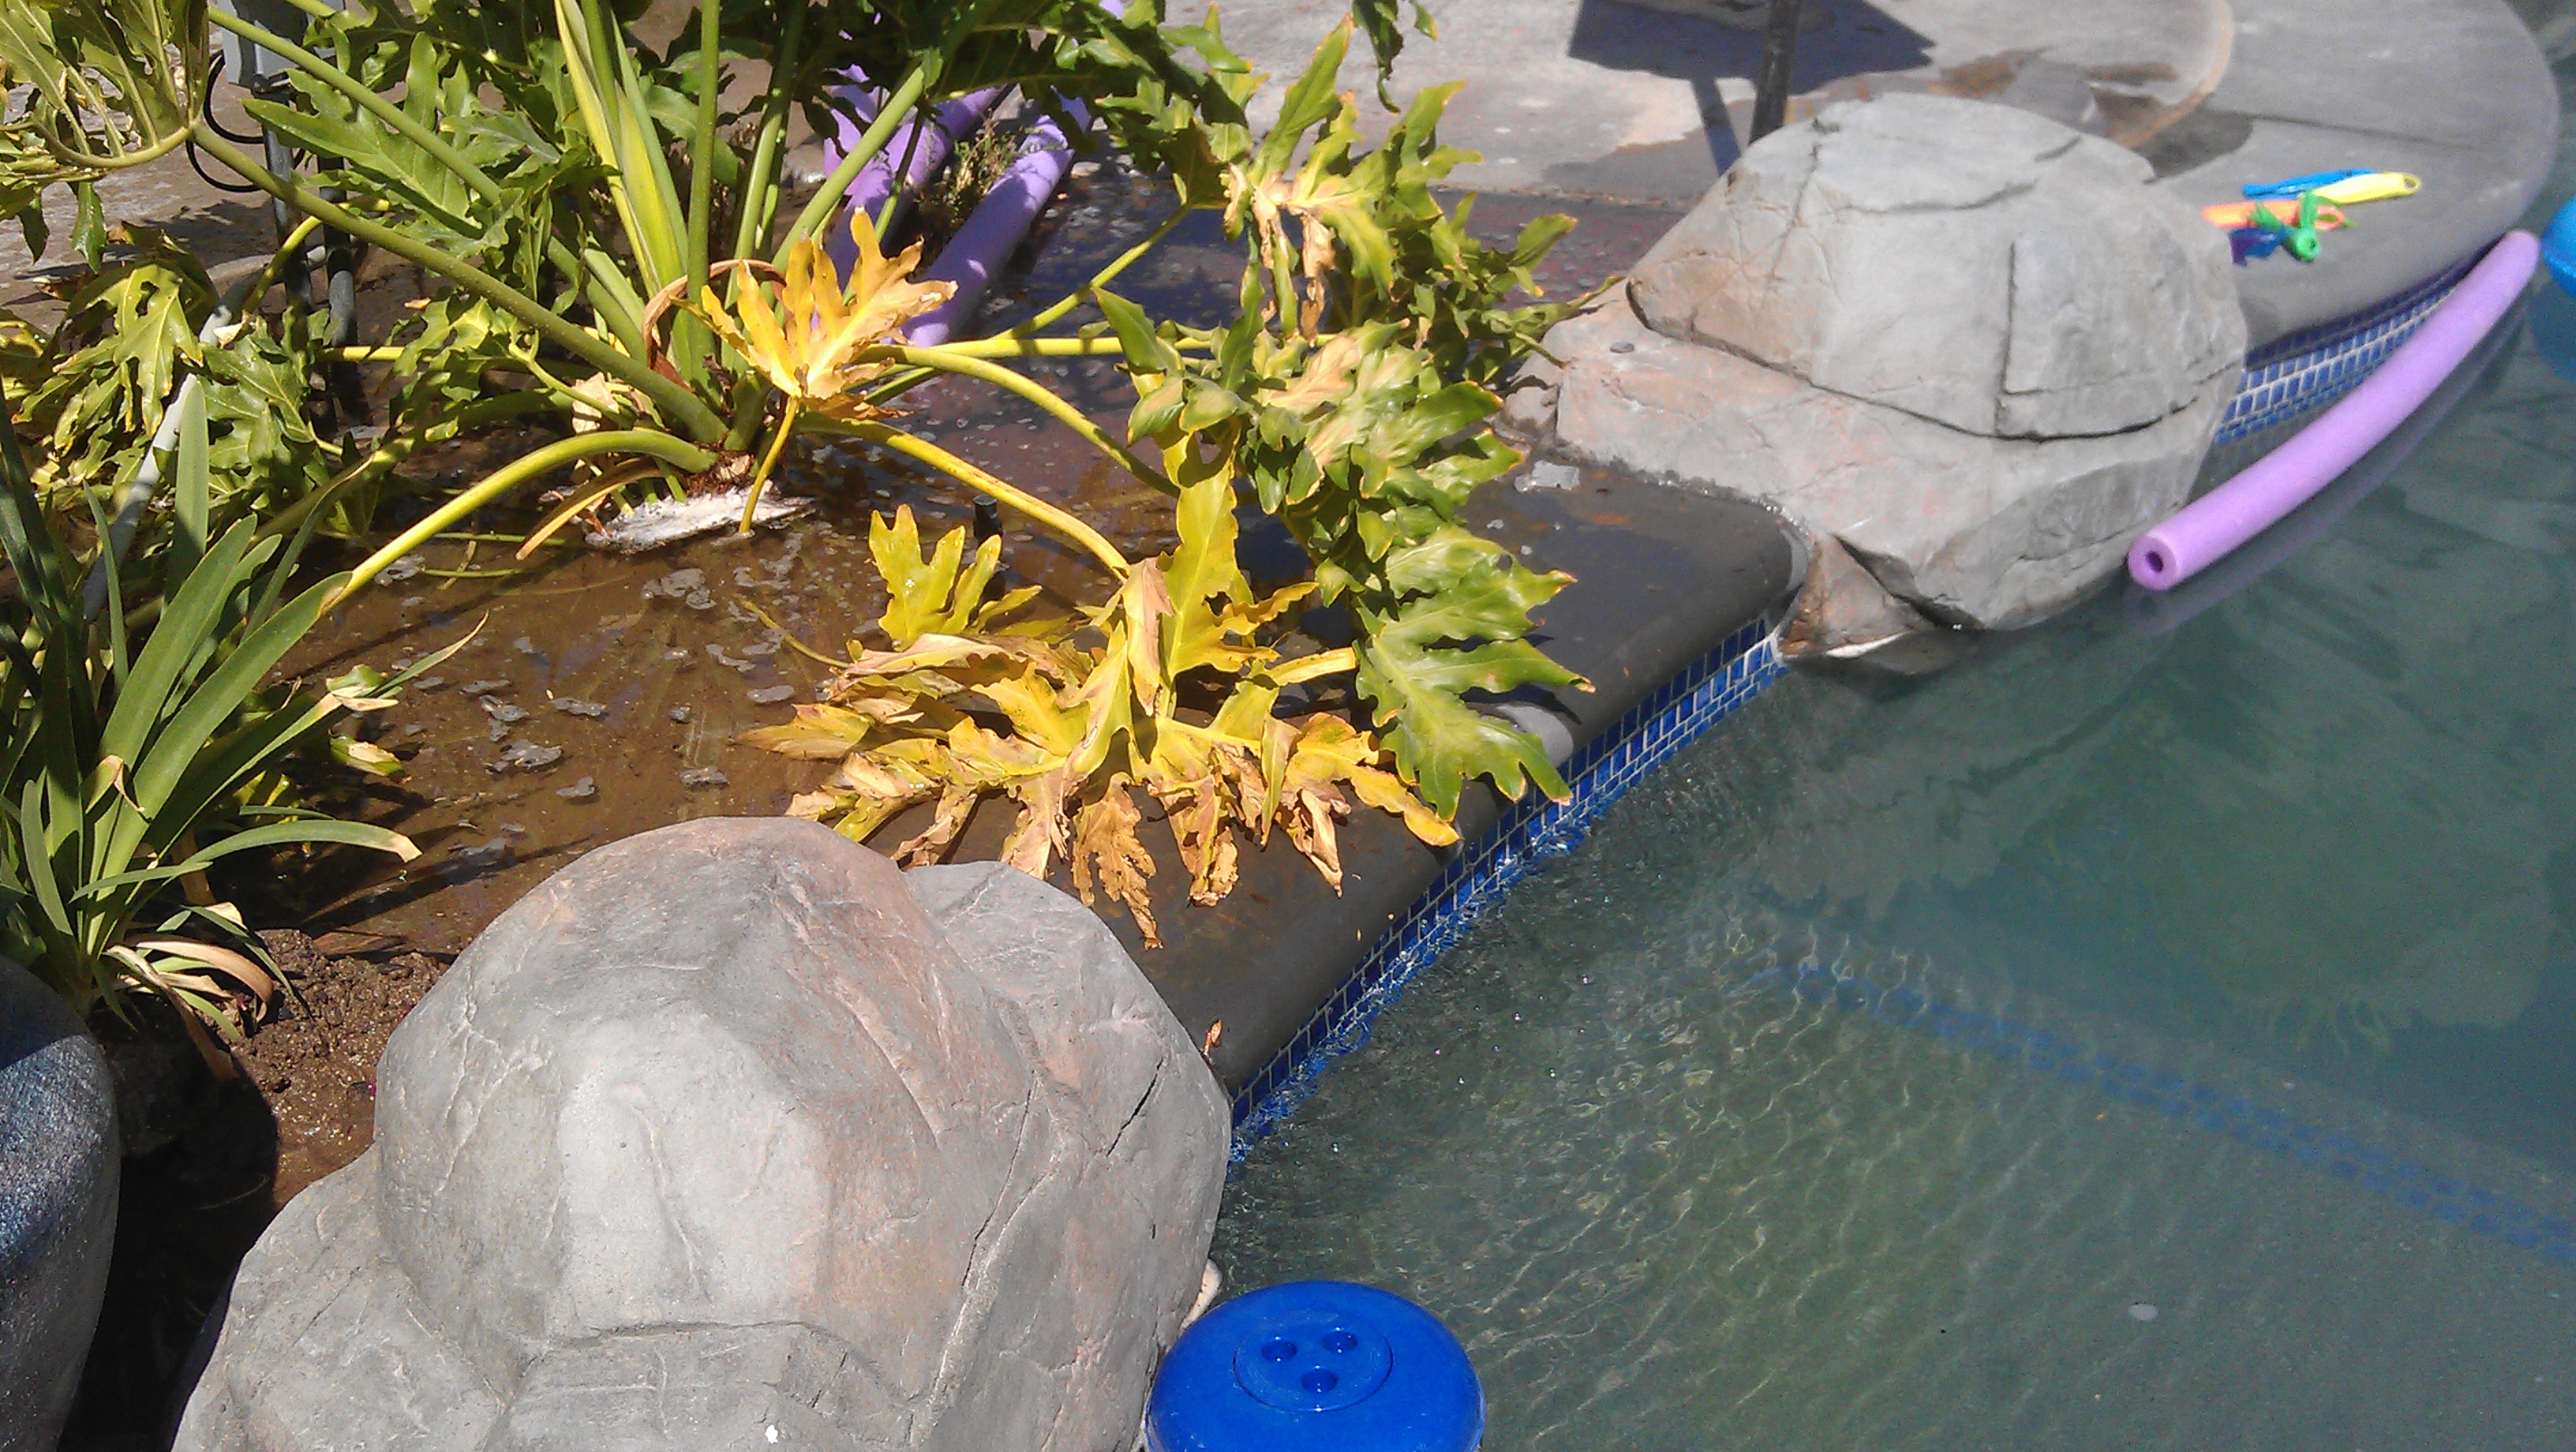 The deck was slopped to the pool causing the planters to overflow into the pool with Mud, By Oasis Custom Pools